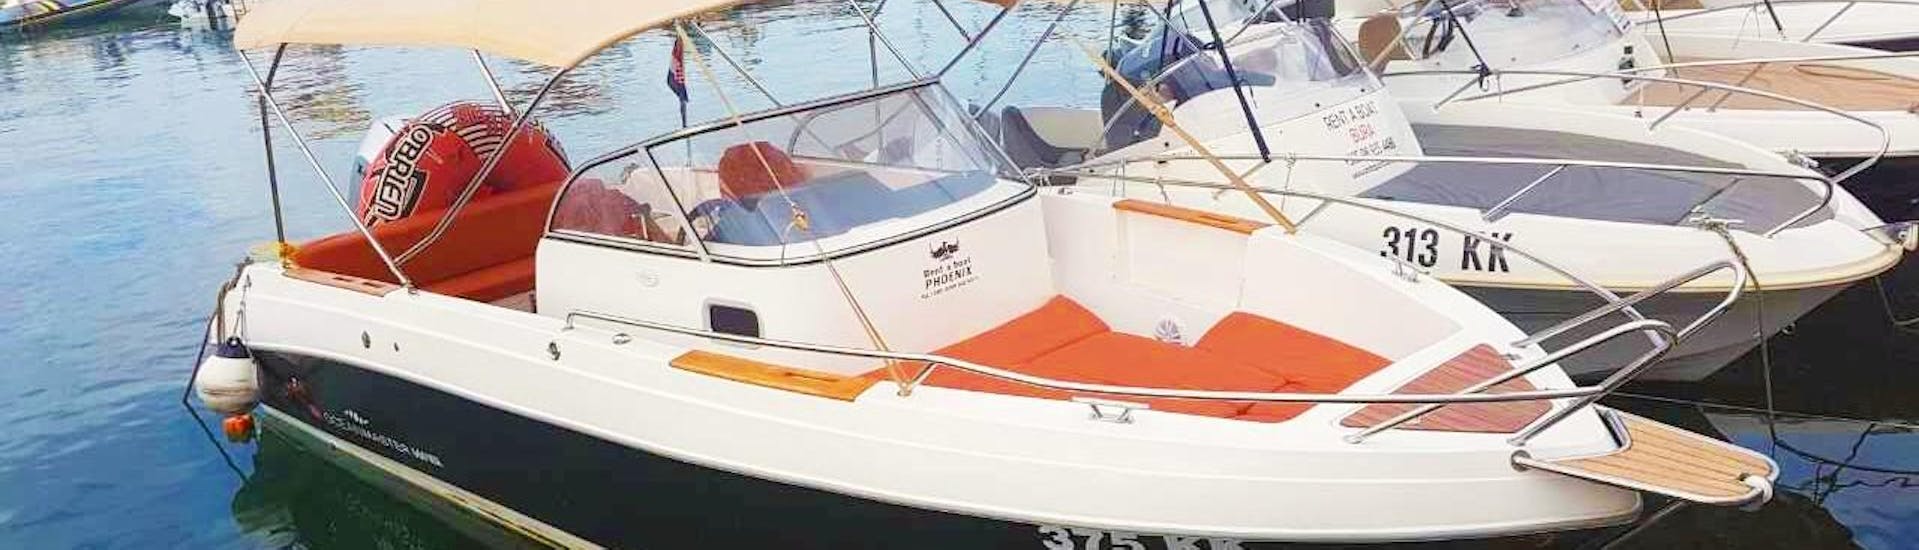 Boat available for a motorboat rental for 8 people in Krk with our partner Rent a Boat Phoenix.